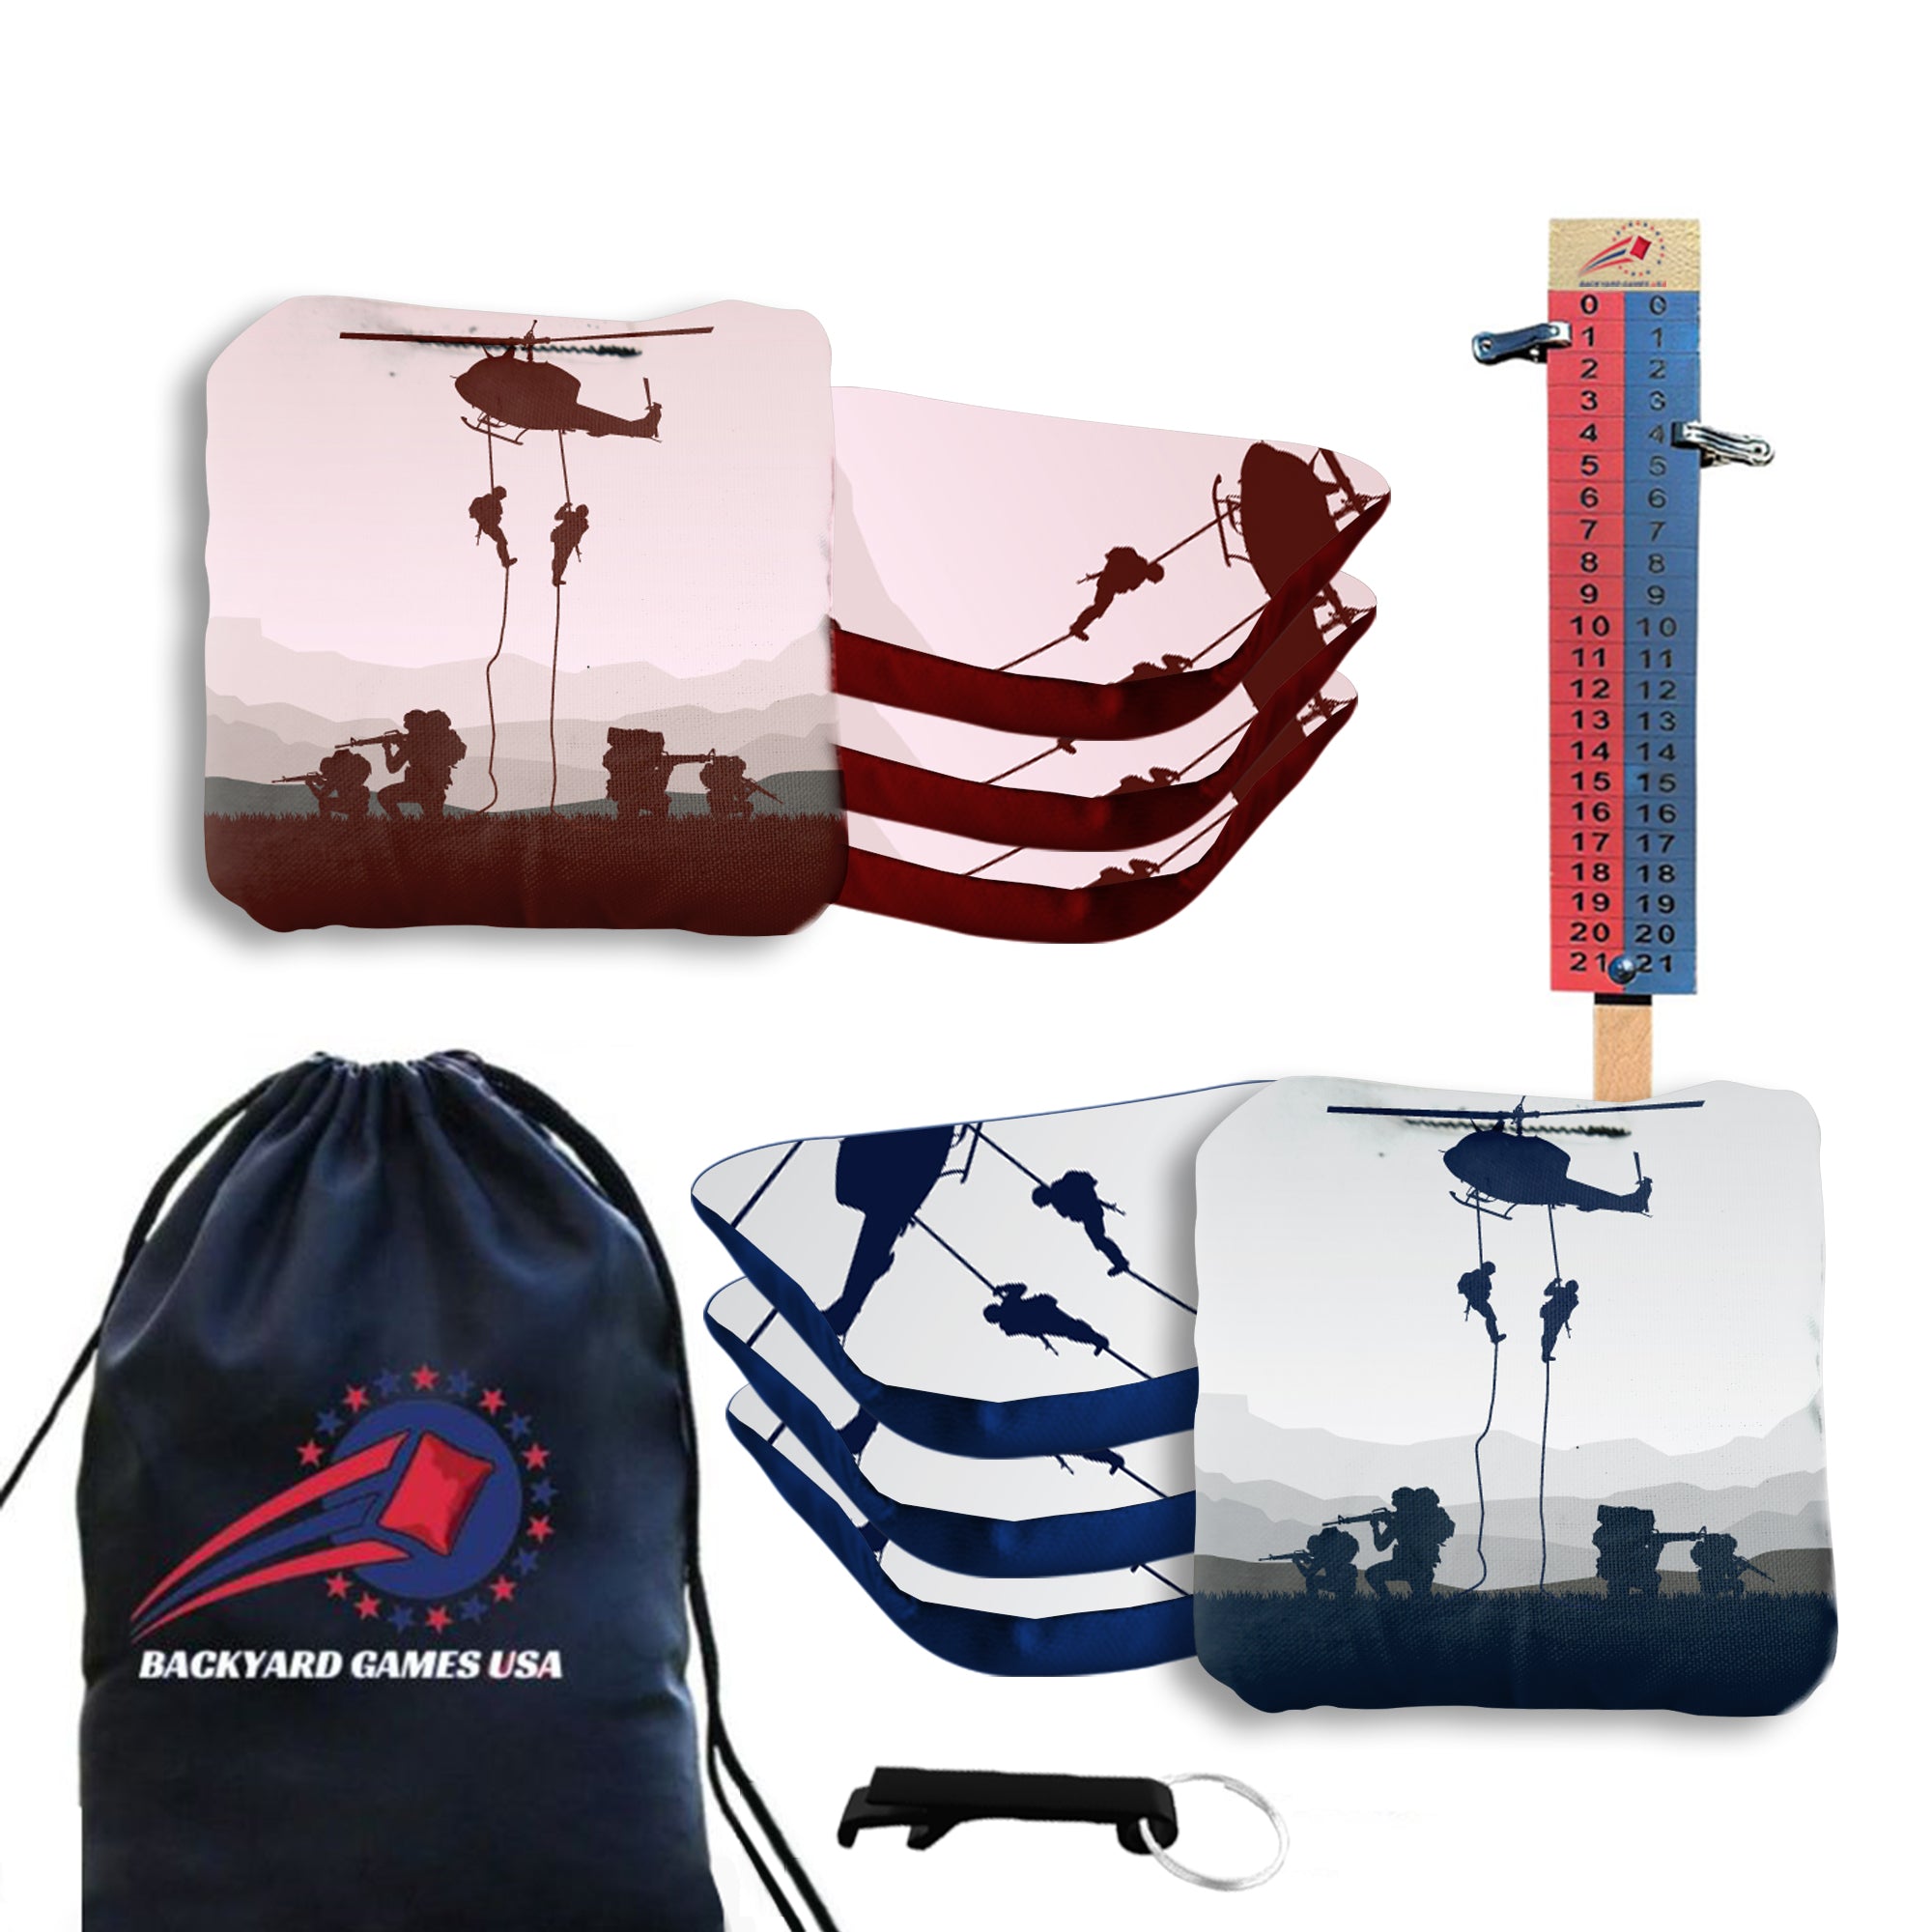 Helicopter Squad Cornhole Bags - Set of 8